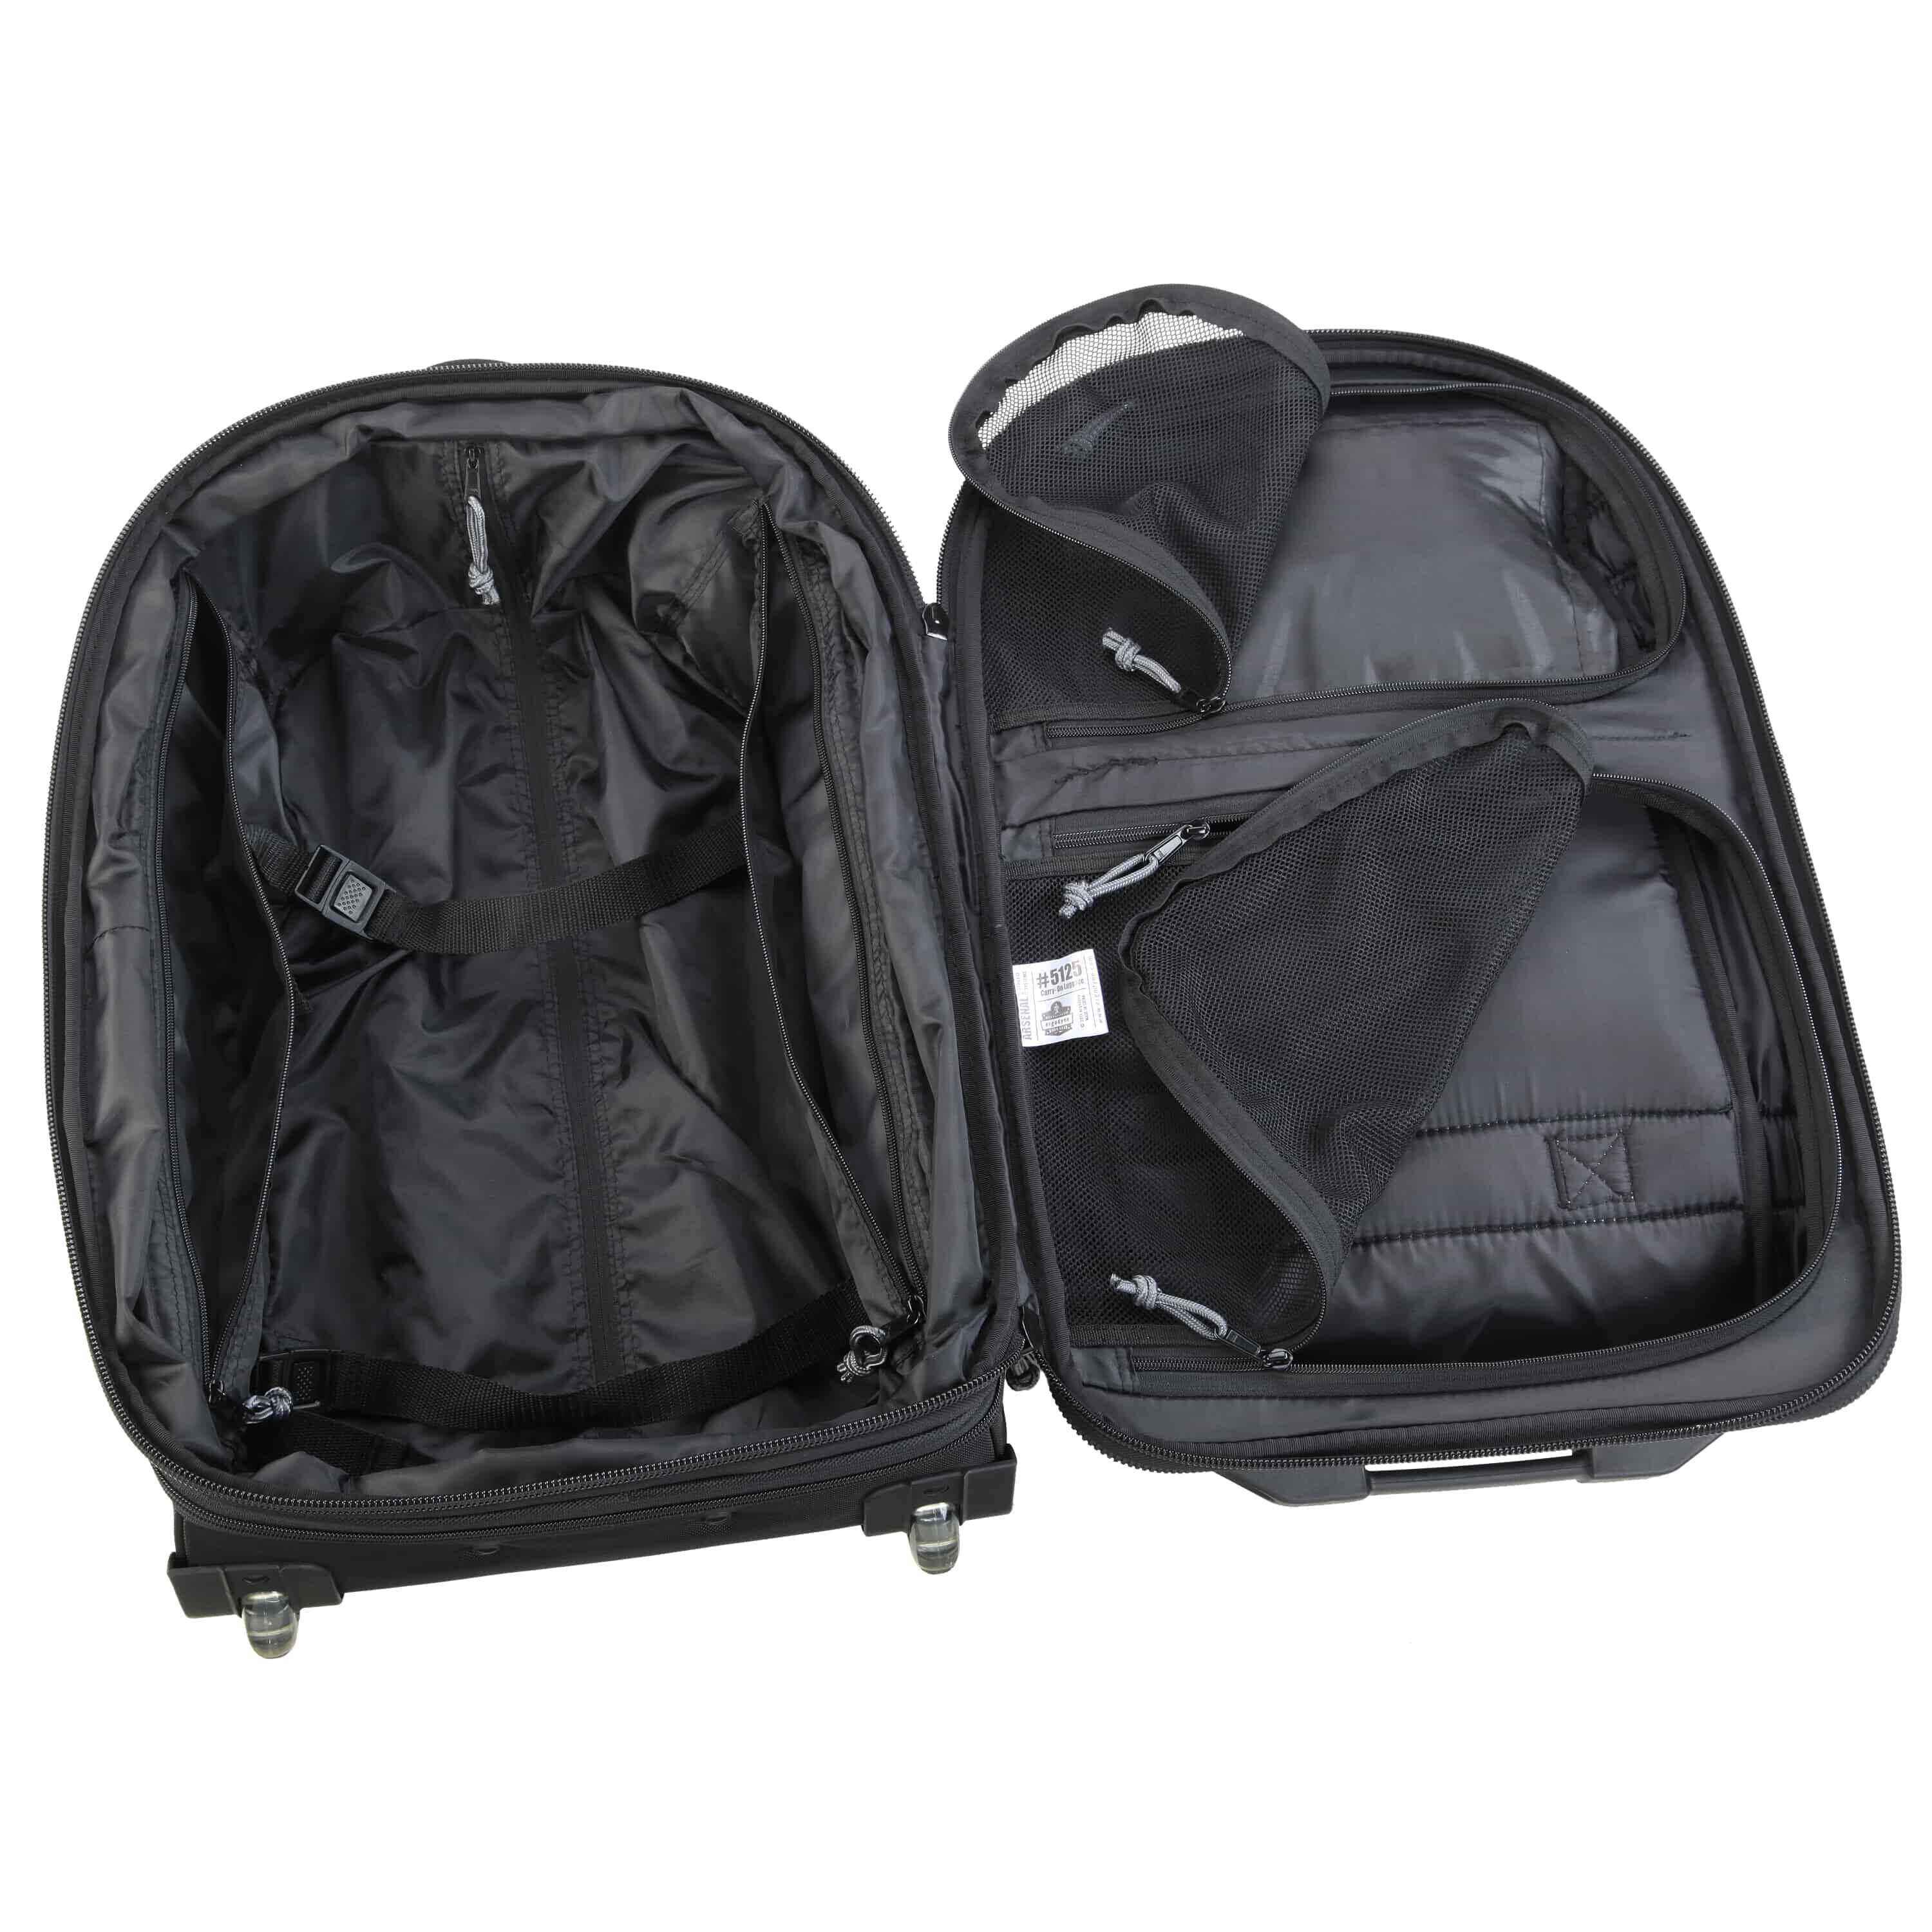 Carry-on Luggage - Bags/Totes